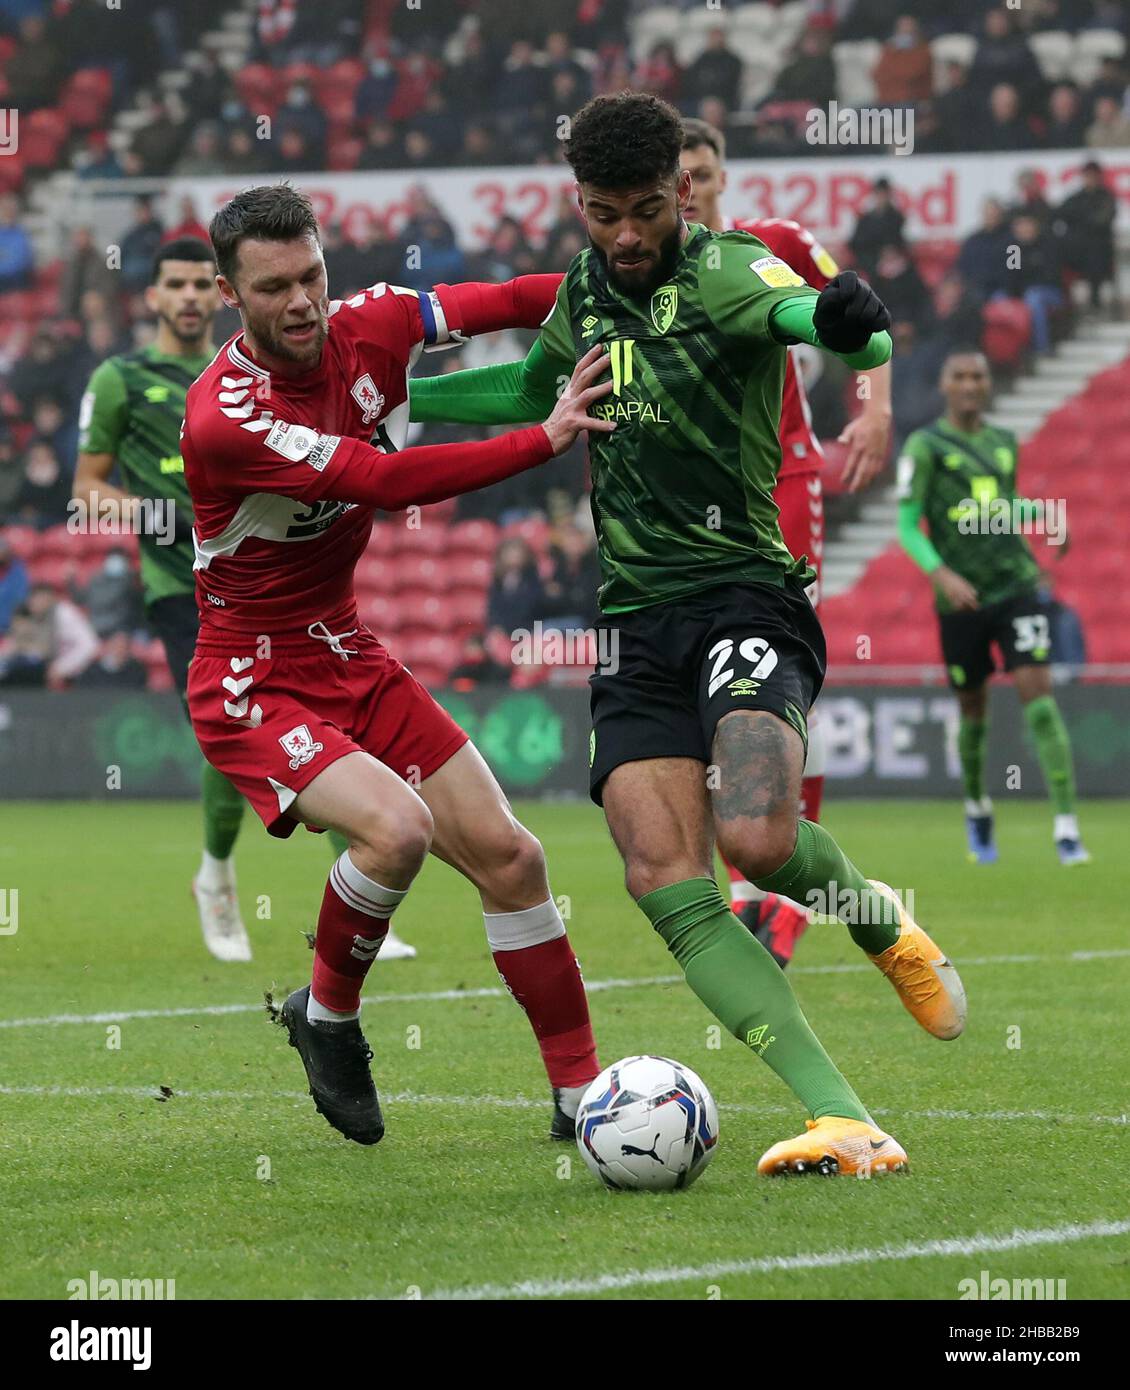 Middlesbrough's Jonny Howson and Bournemouth's Philip Billing (right)  battle for the ball during the Sky Bet Championship match at Riverside  Stadium, Middlesbrough. Picture date: Saturday December 18, 2021 Stock  Photo - Alamy